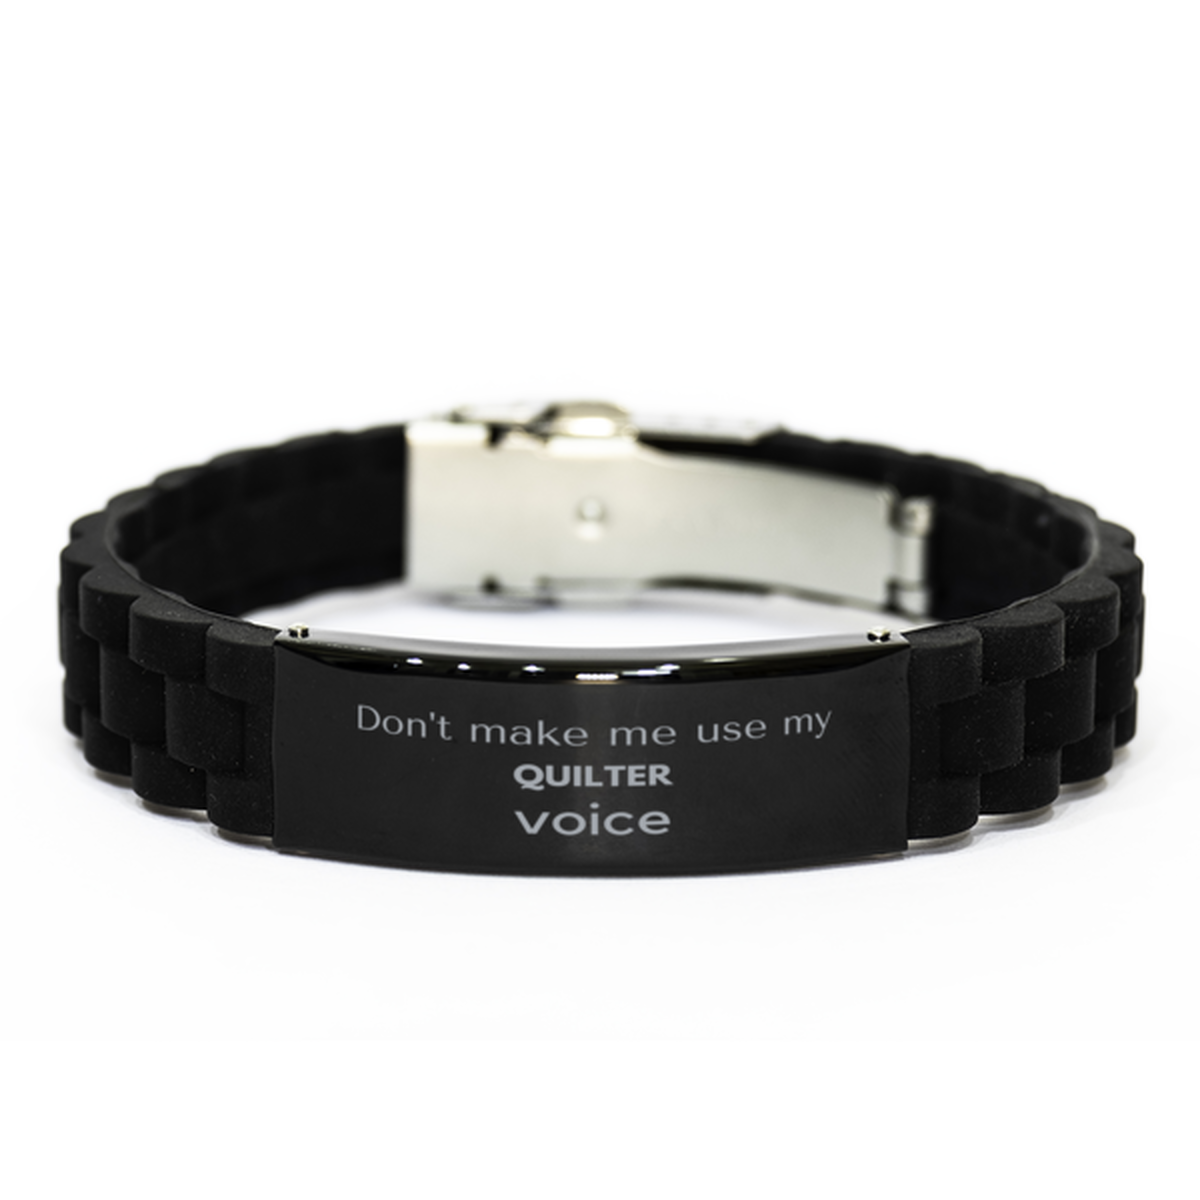 Don't make me use my Quilter voice, Sarcasm Quilter Gifts, Christmas Quilter Black Glidelock Clasp Bracelet Birthday Unique Gifts For Quilter Coworkers, Men, Women, Colleague, Friends